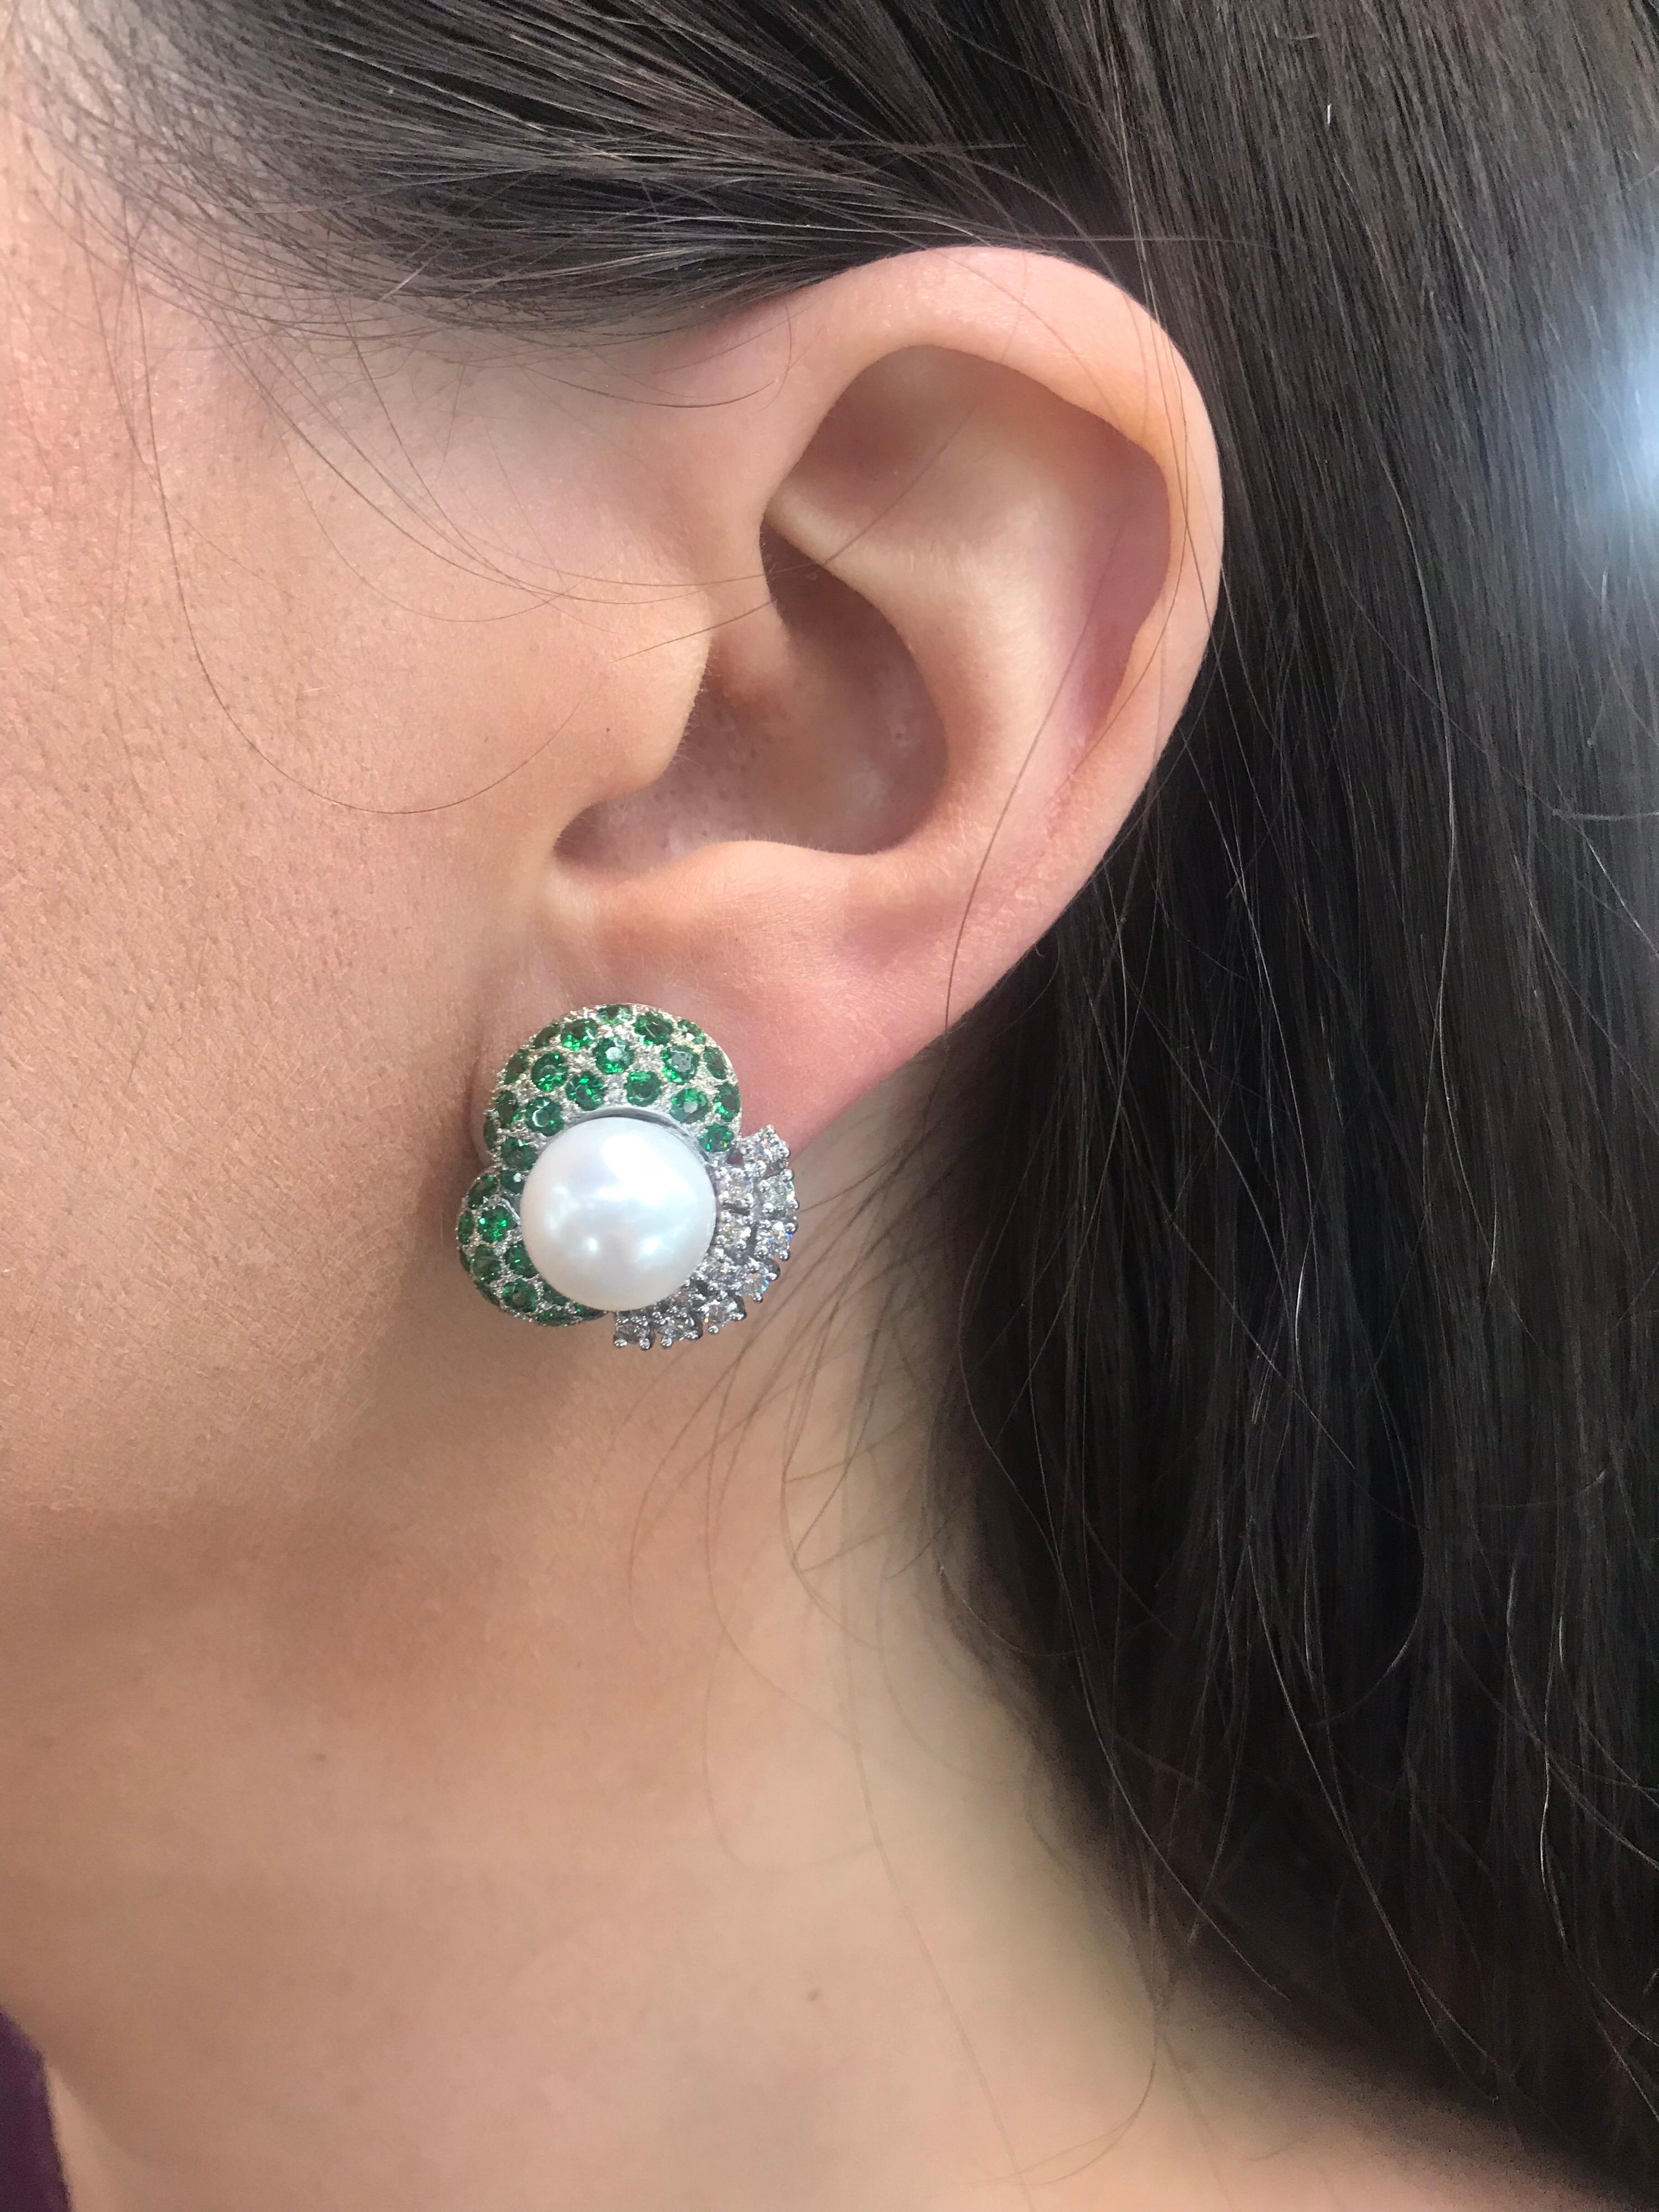 18K White gold stud earrings featuring two white pearls measuring 10-11 MM, flanked with vivid green Tsavorite gemstones weighing 2 carats and round brilliants weighing 0.72 carats.
Color G
Clarity VS-SI

Very comfortable on the ear!!!
